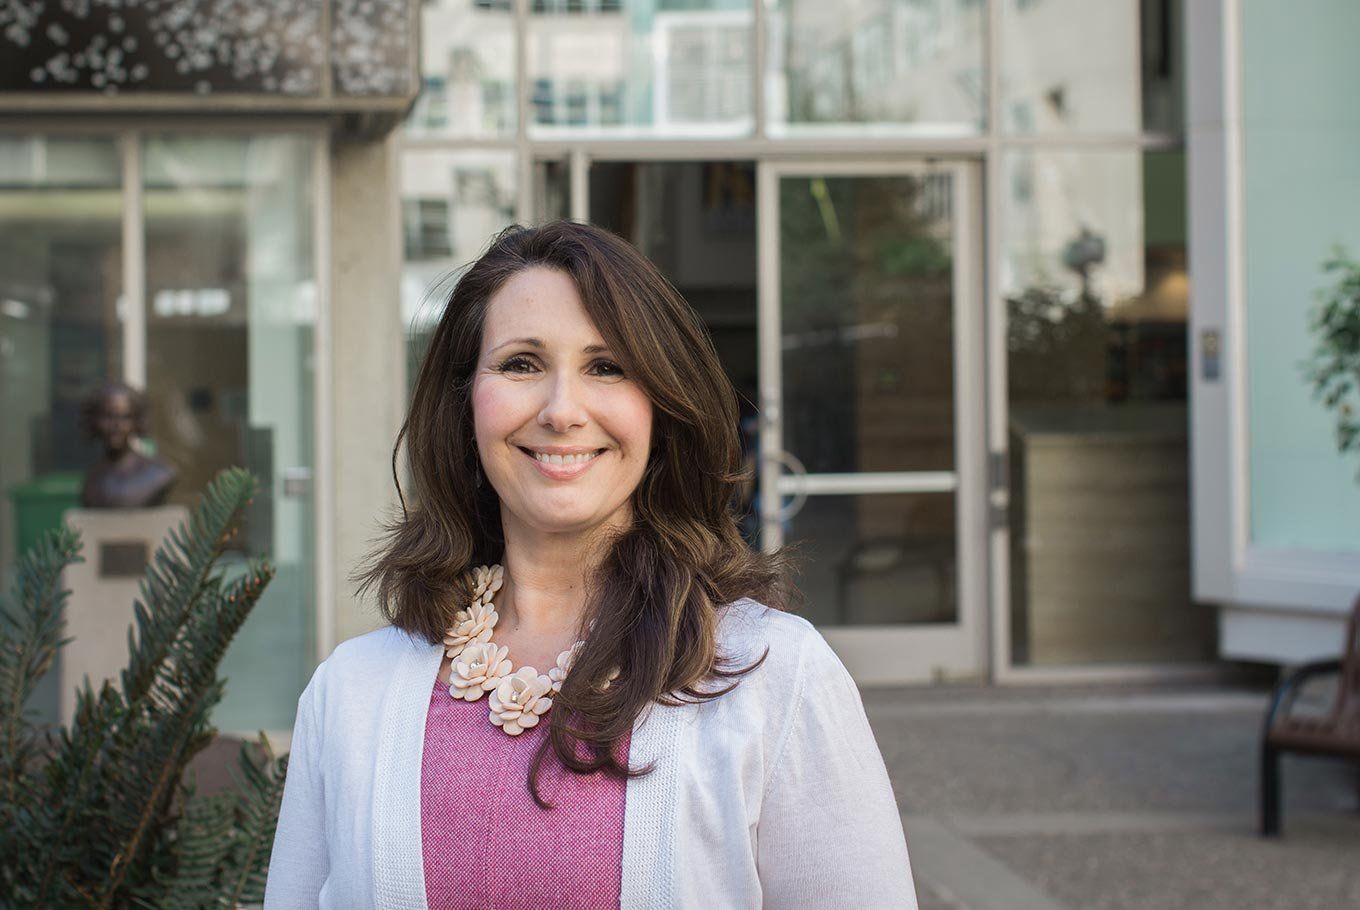 Photo of Gina Intinarelli outside the UCSF School of Nursing.